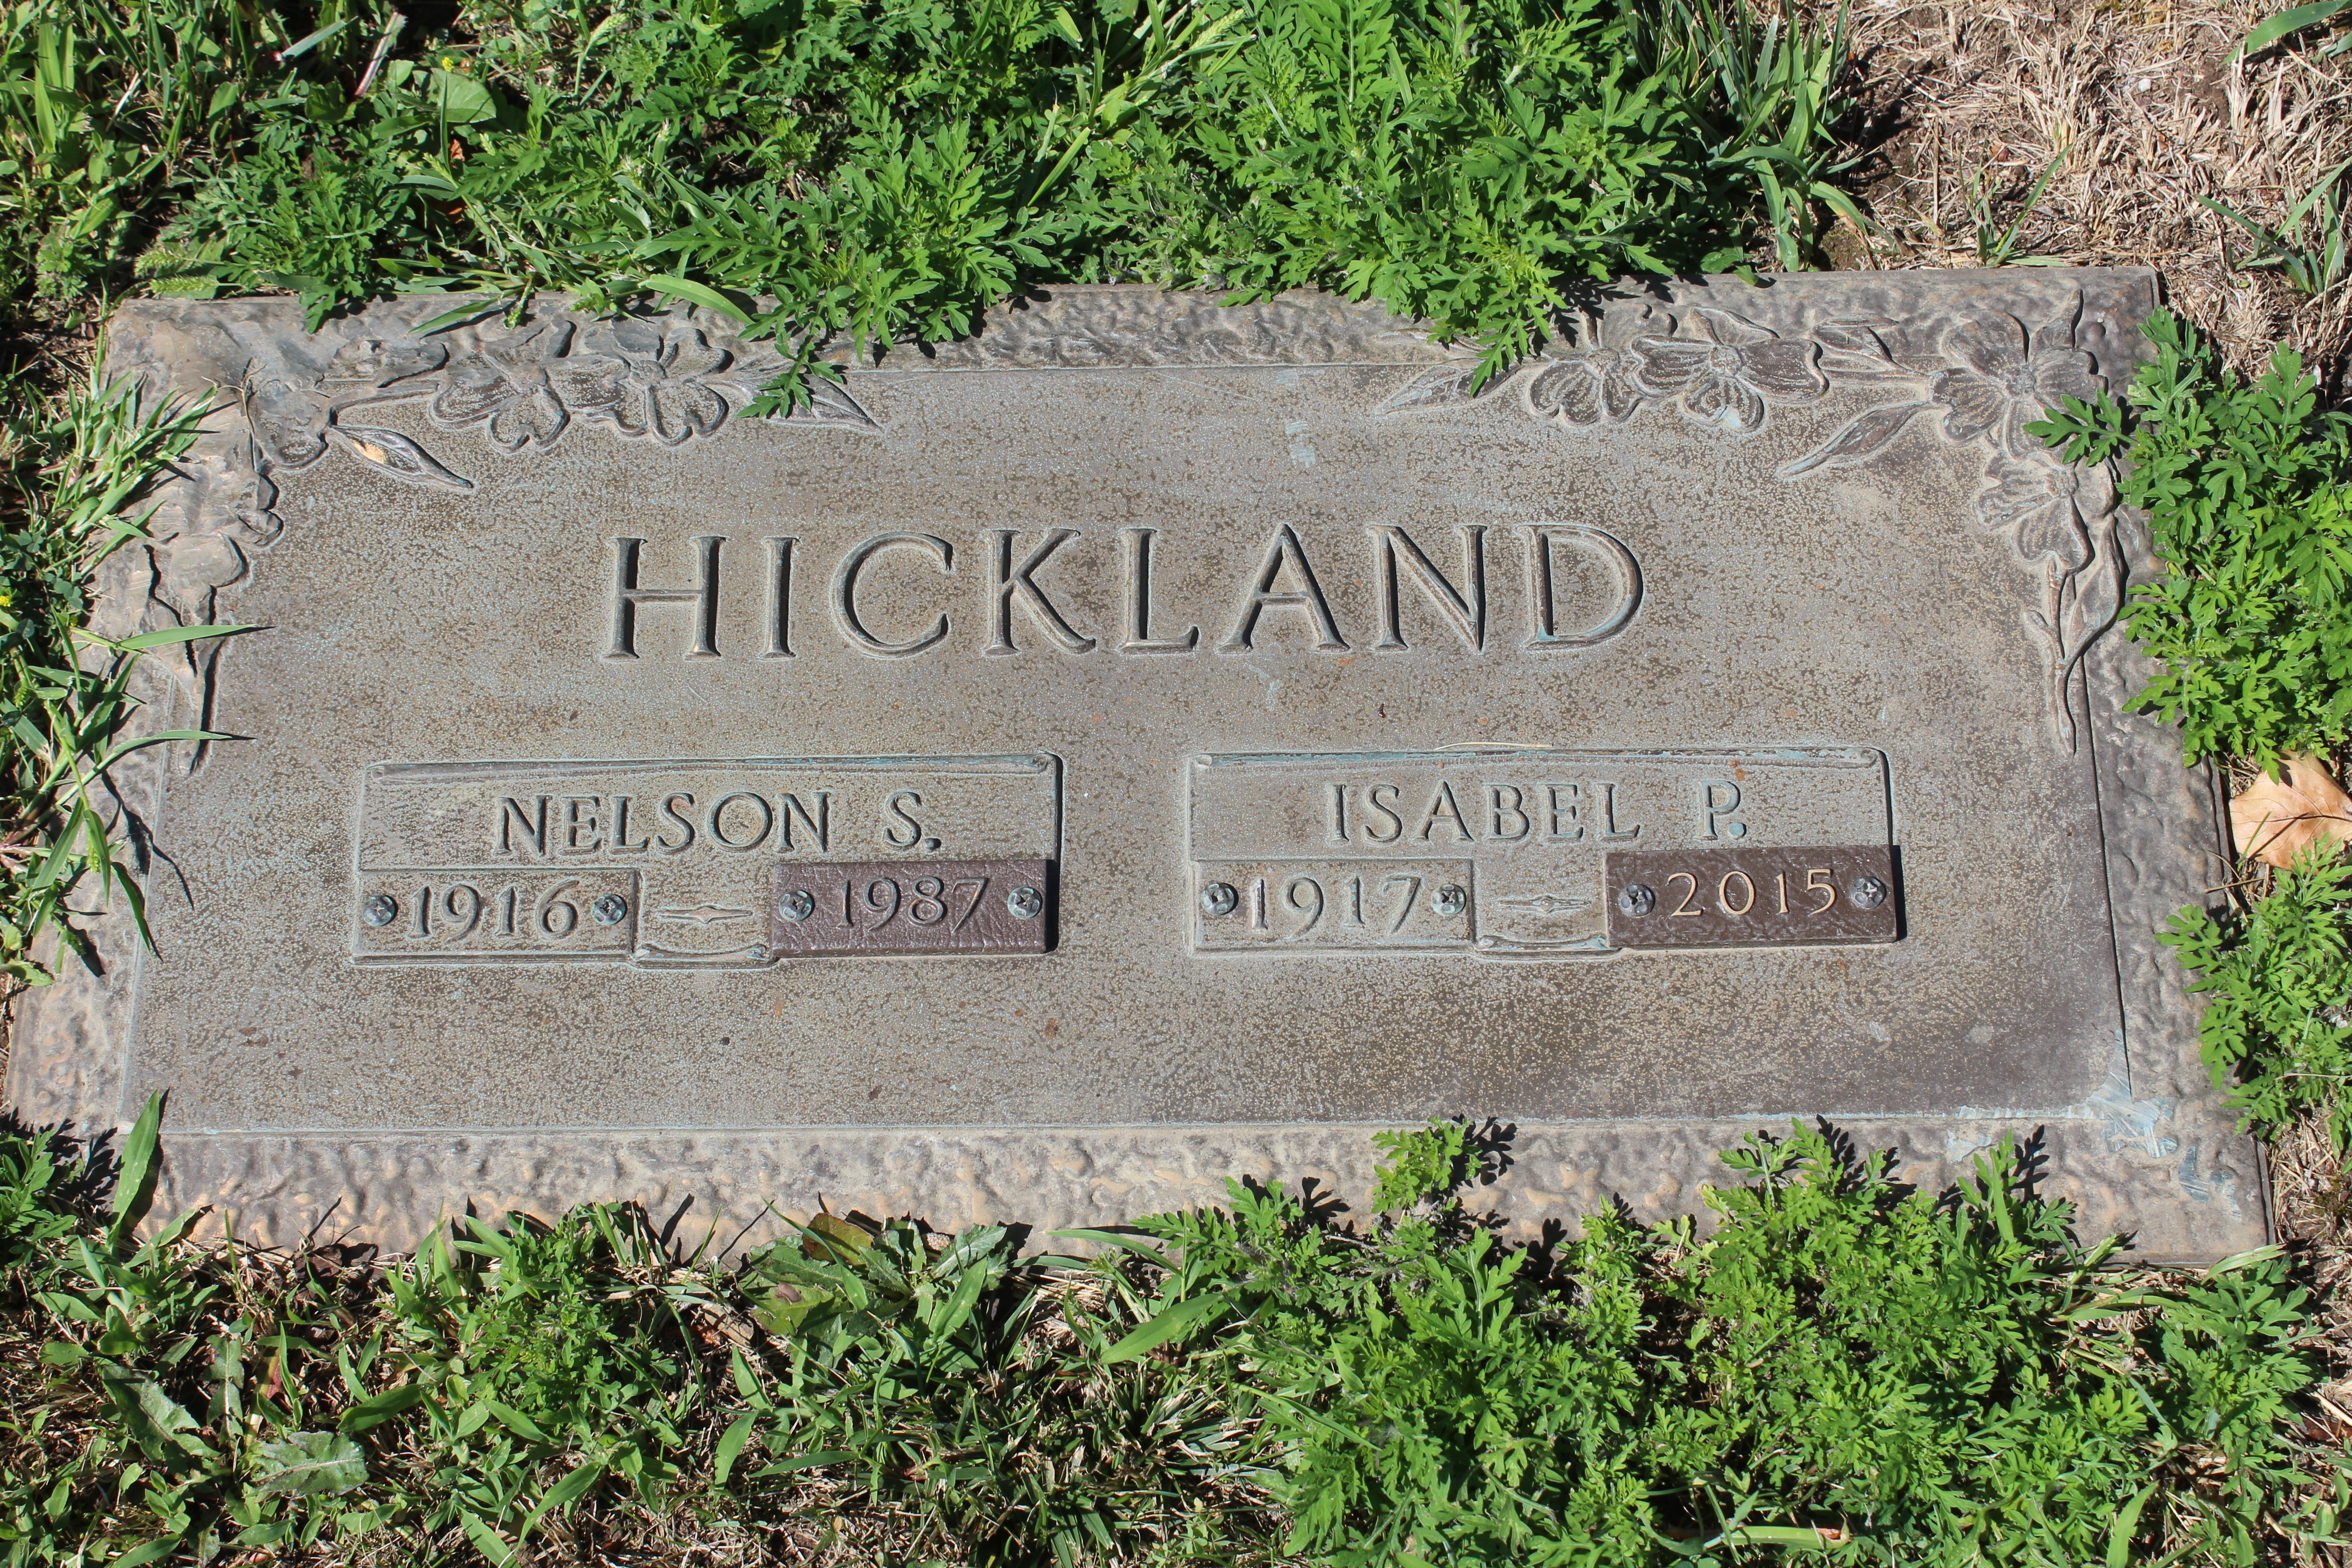 Nelson Hickland and Isabel Hickland